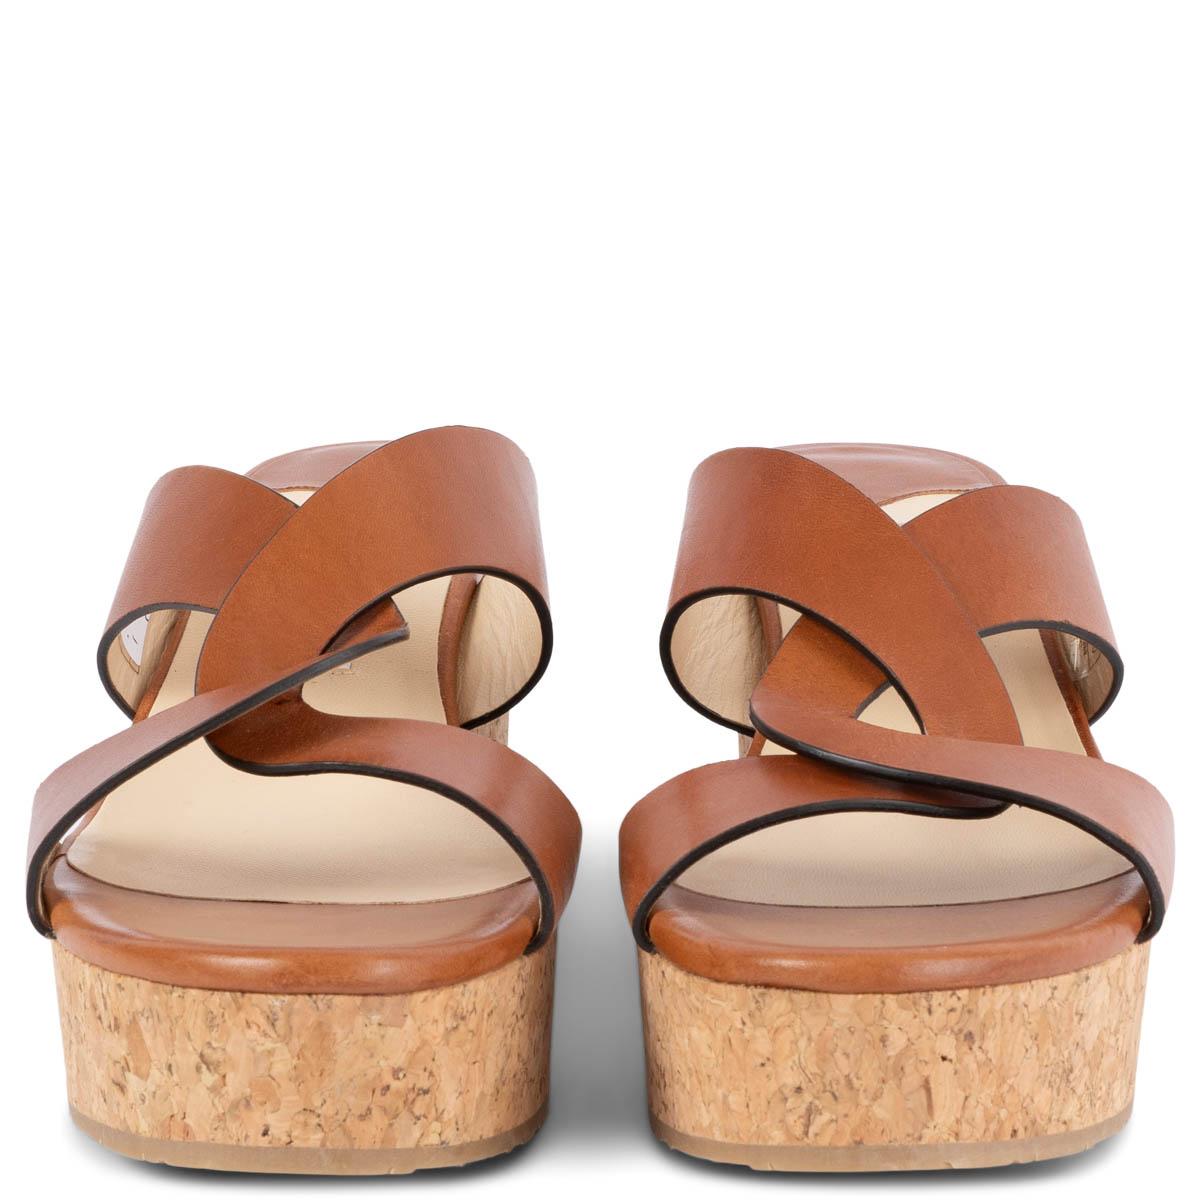 100% authentic Jimmy Choo Atia 75 cork wedge mules with cognac brown twisted leather strap detail. Have been worn and are in excellent condition. 

Measurements
Imprinted Size	40
Shoe Size	40
Inside Sole	26.5cm (10.3in)
Width	8cm (3.1in)
Heel	8cm